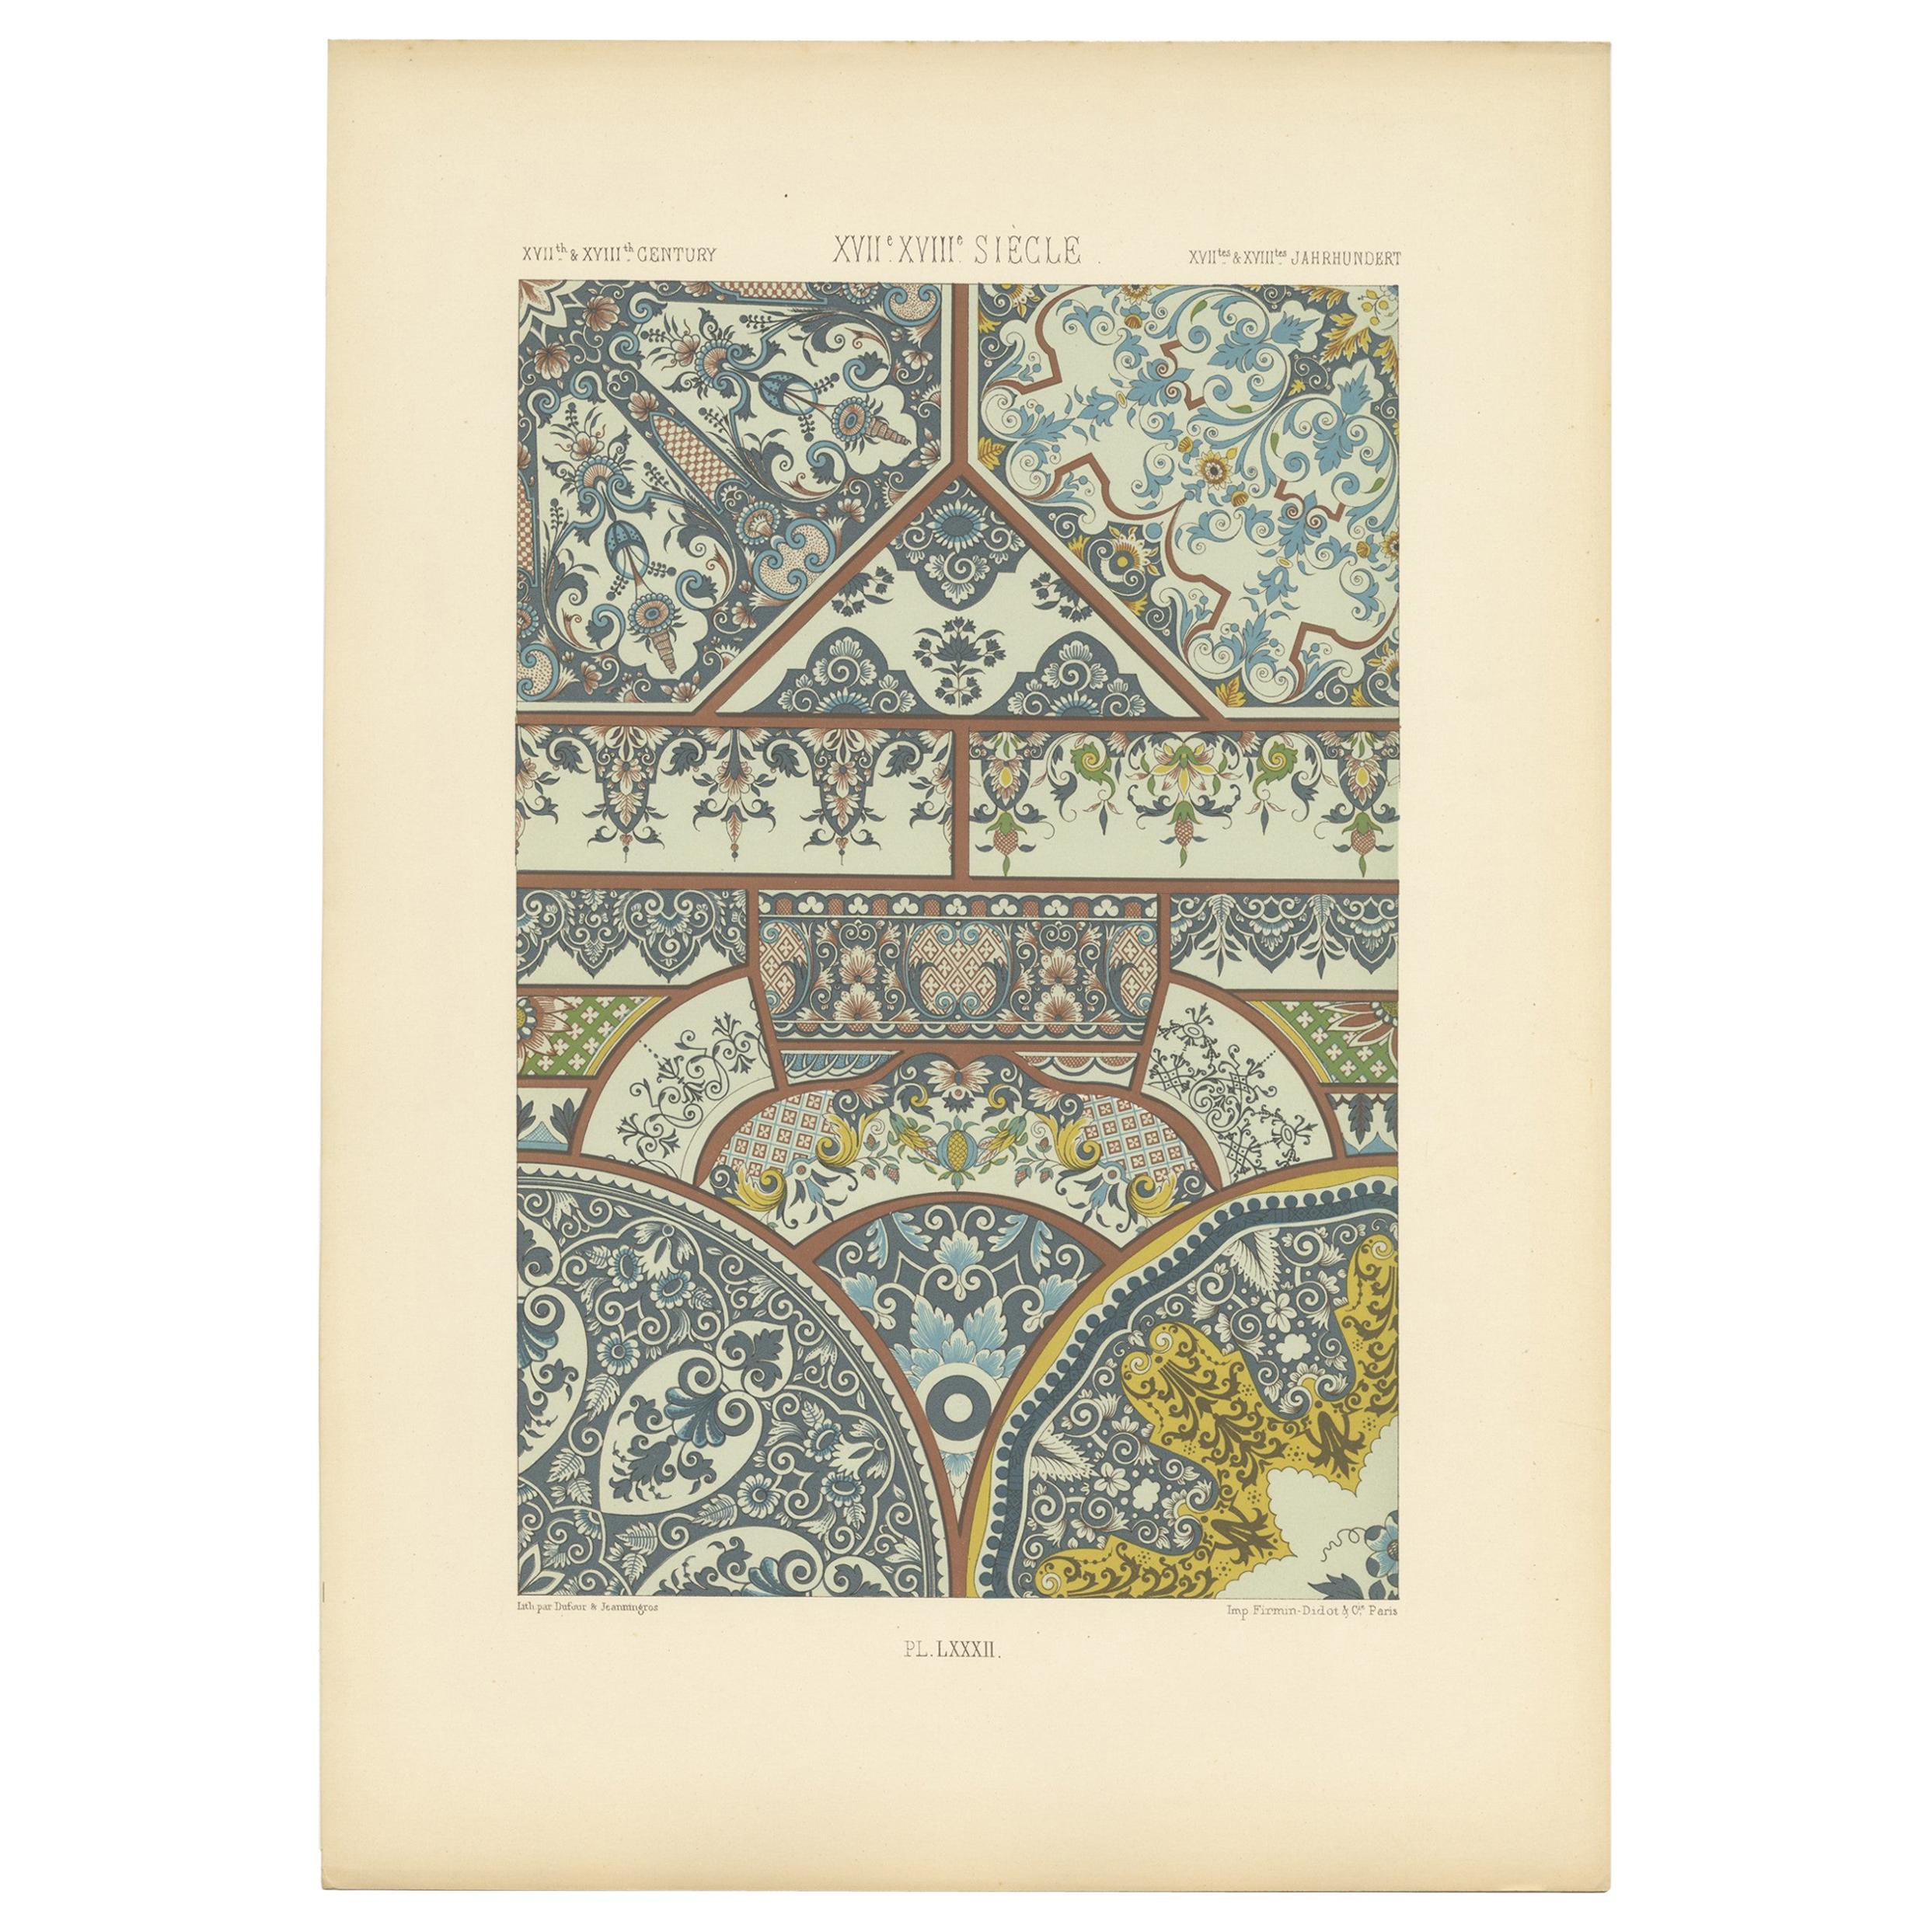 Pl. 82 Antique Print of XVIIth and XVIIIth Century Ornaments by Racinet (c.1890)